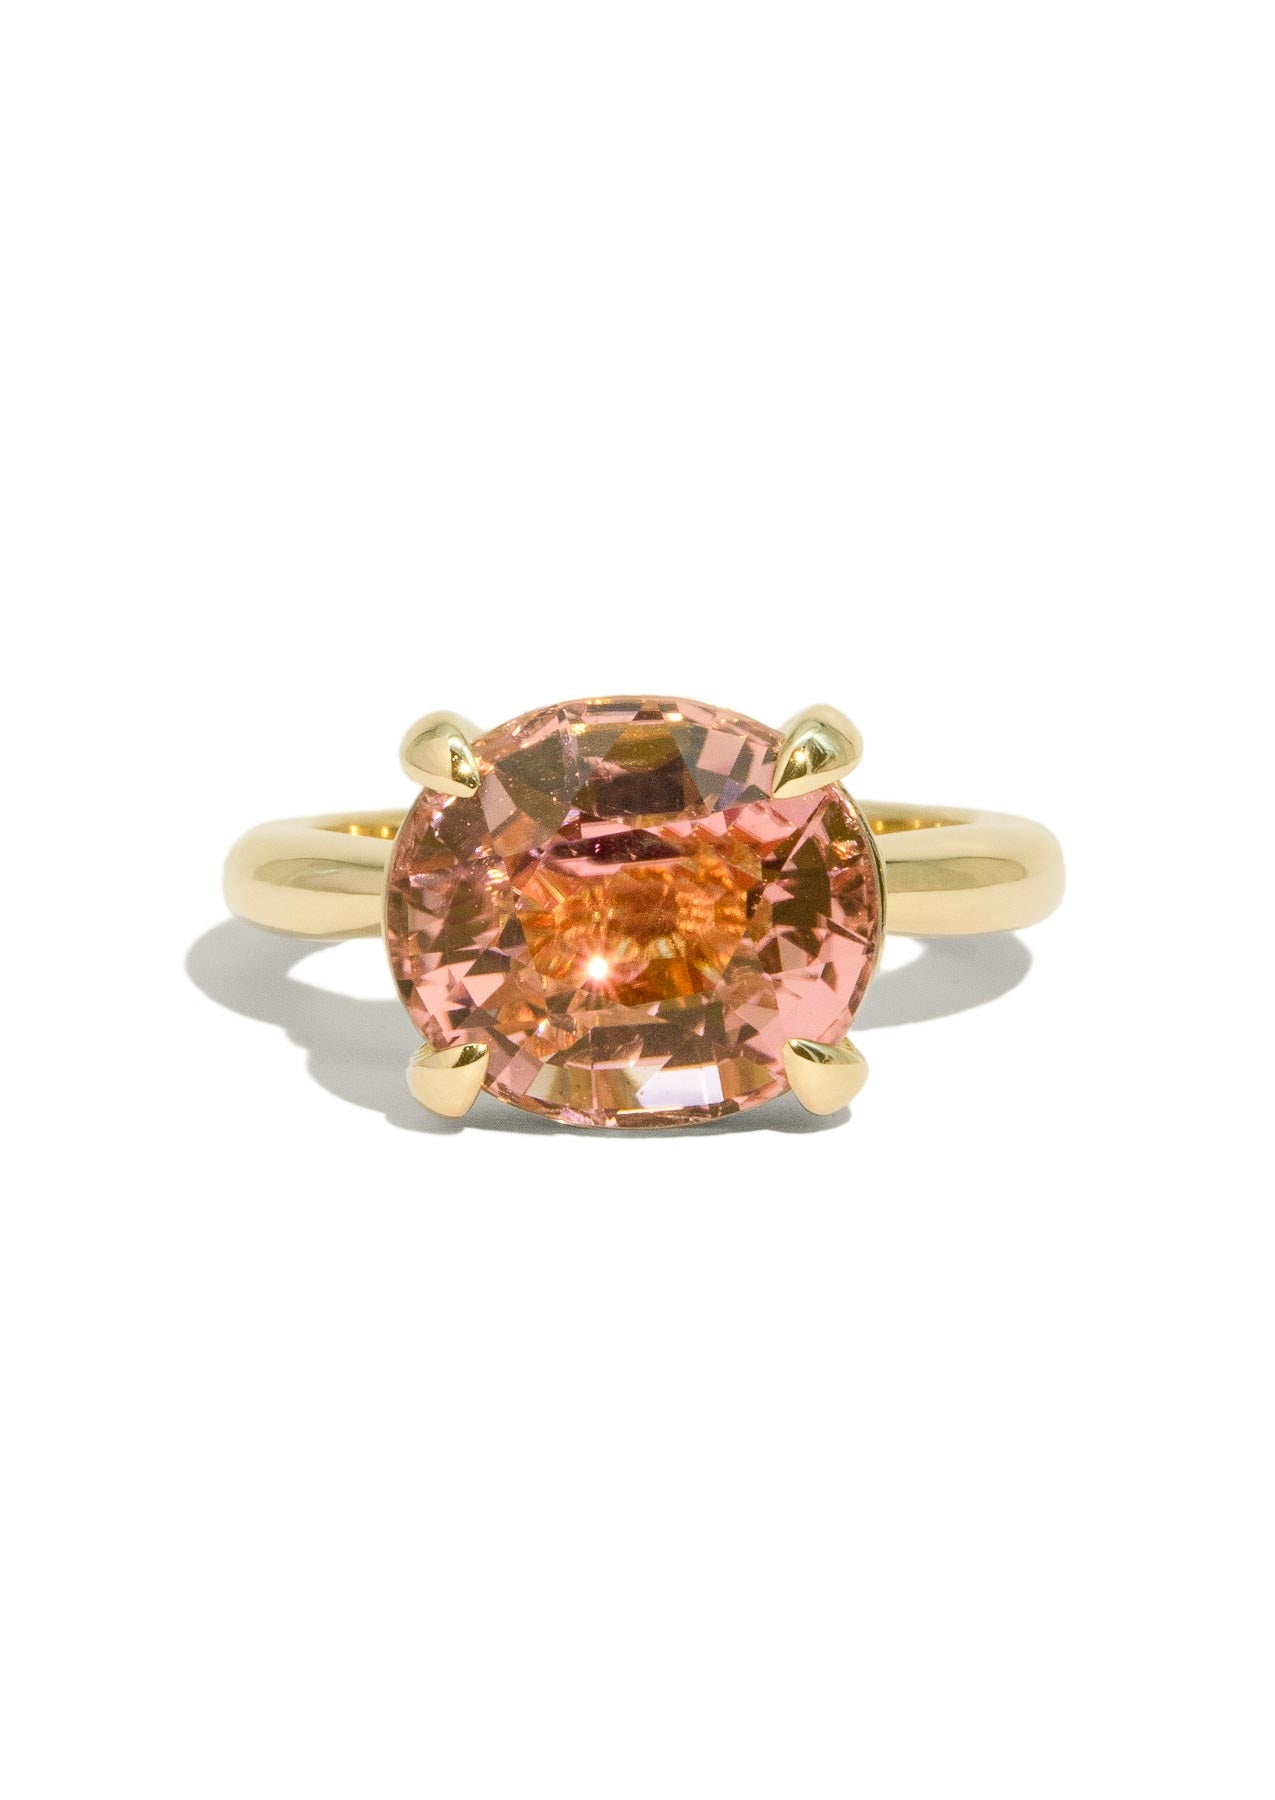 The June Ring with 6.58ct Oval Tourmaline